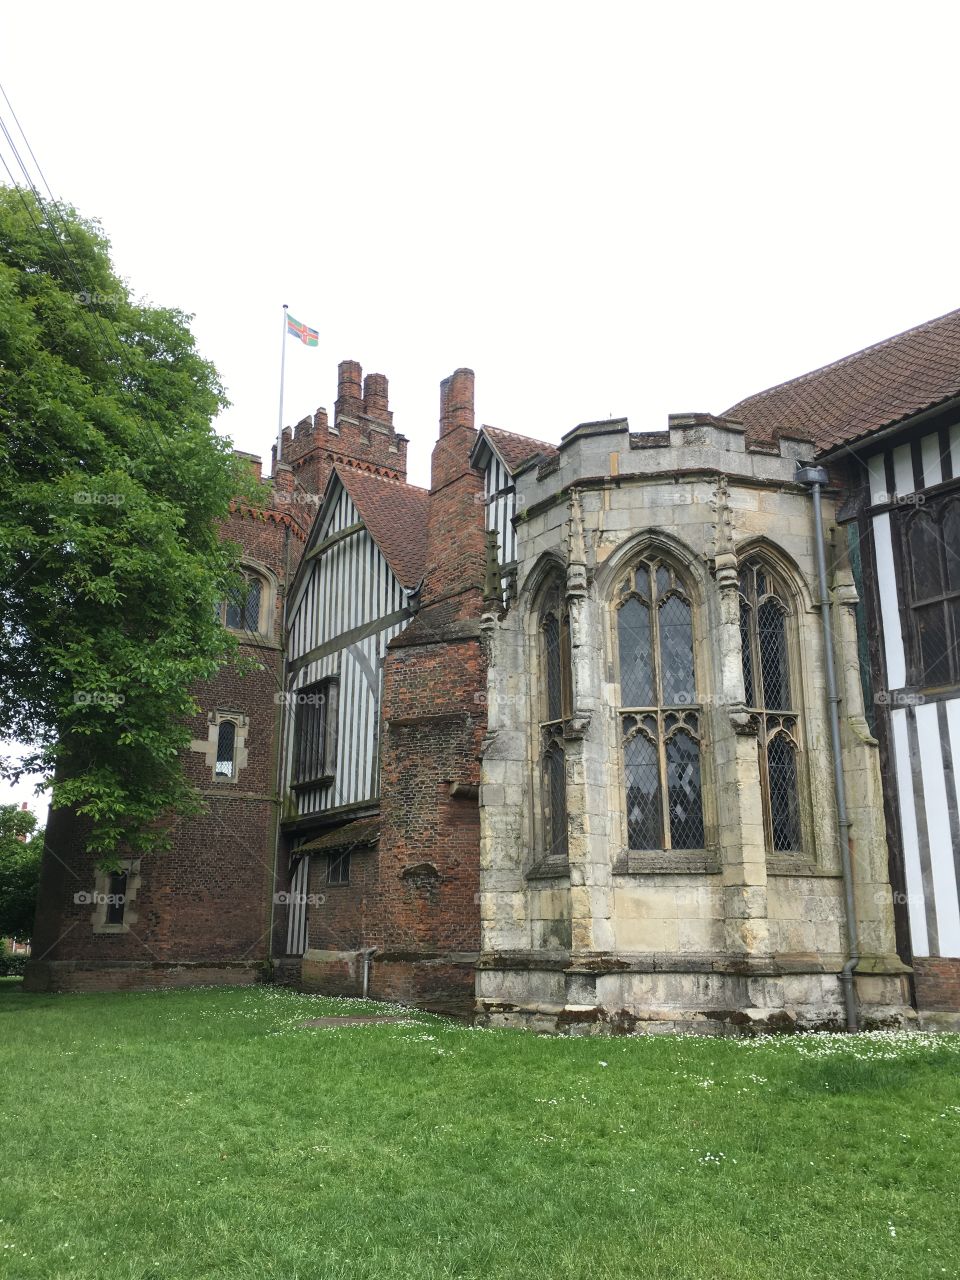 Exterior view of brickwork, timber framework and windows of the mediaeval Manor House of Gainsborough Old Hall in England with tower flying the Lincolnshire flag